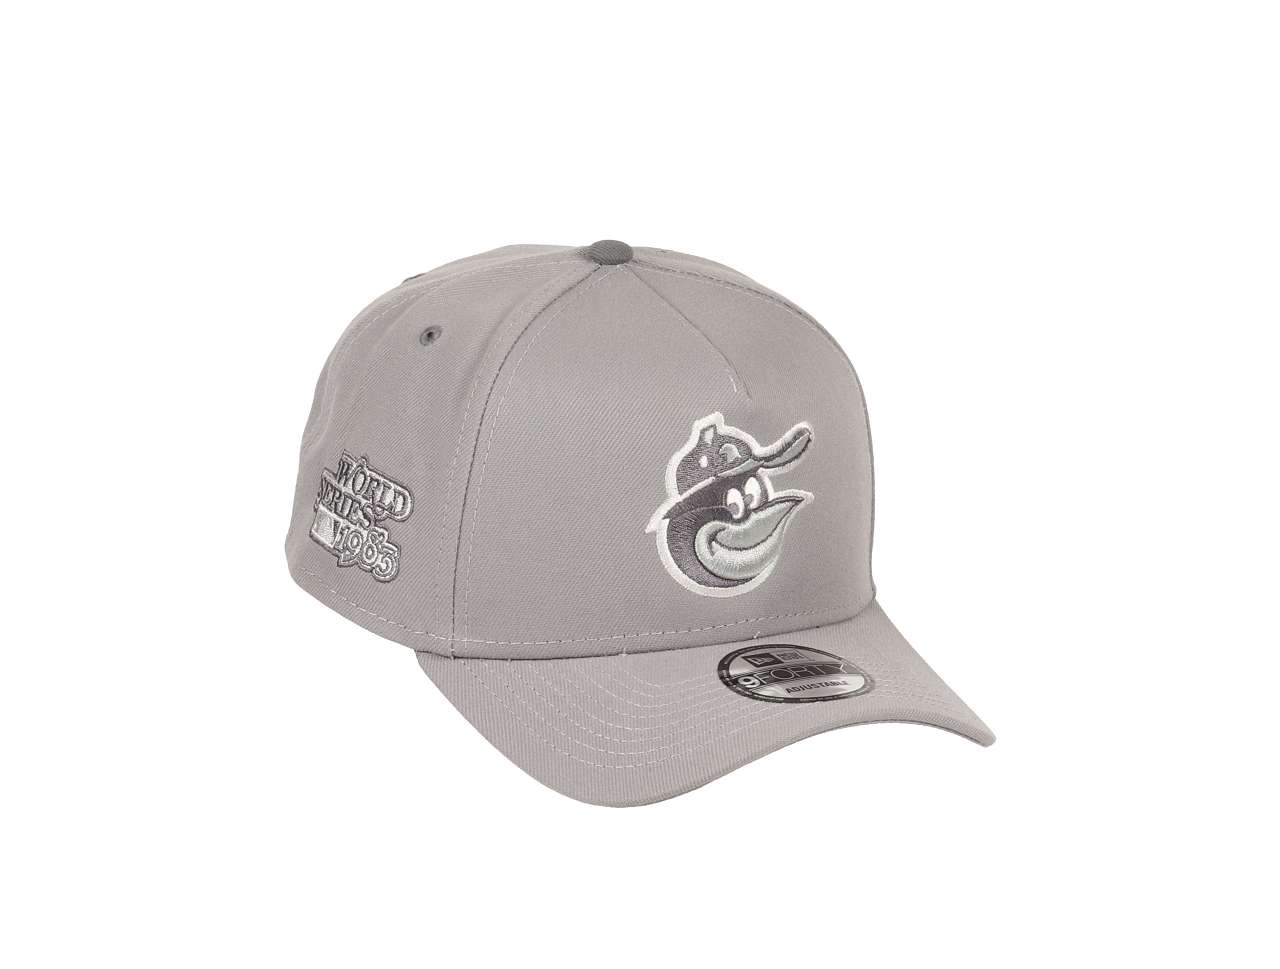 Baltimore Orioles MLB World Series 1983 Sidepatch Cooperstown Gray Chrome 9Forty A-Frame Snapback Cap New Era